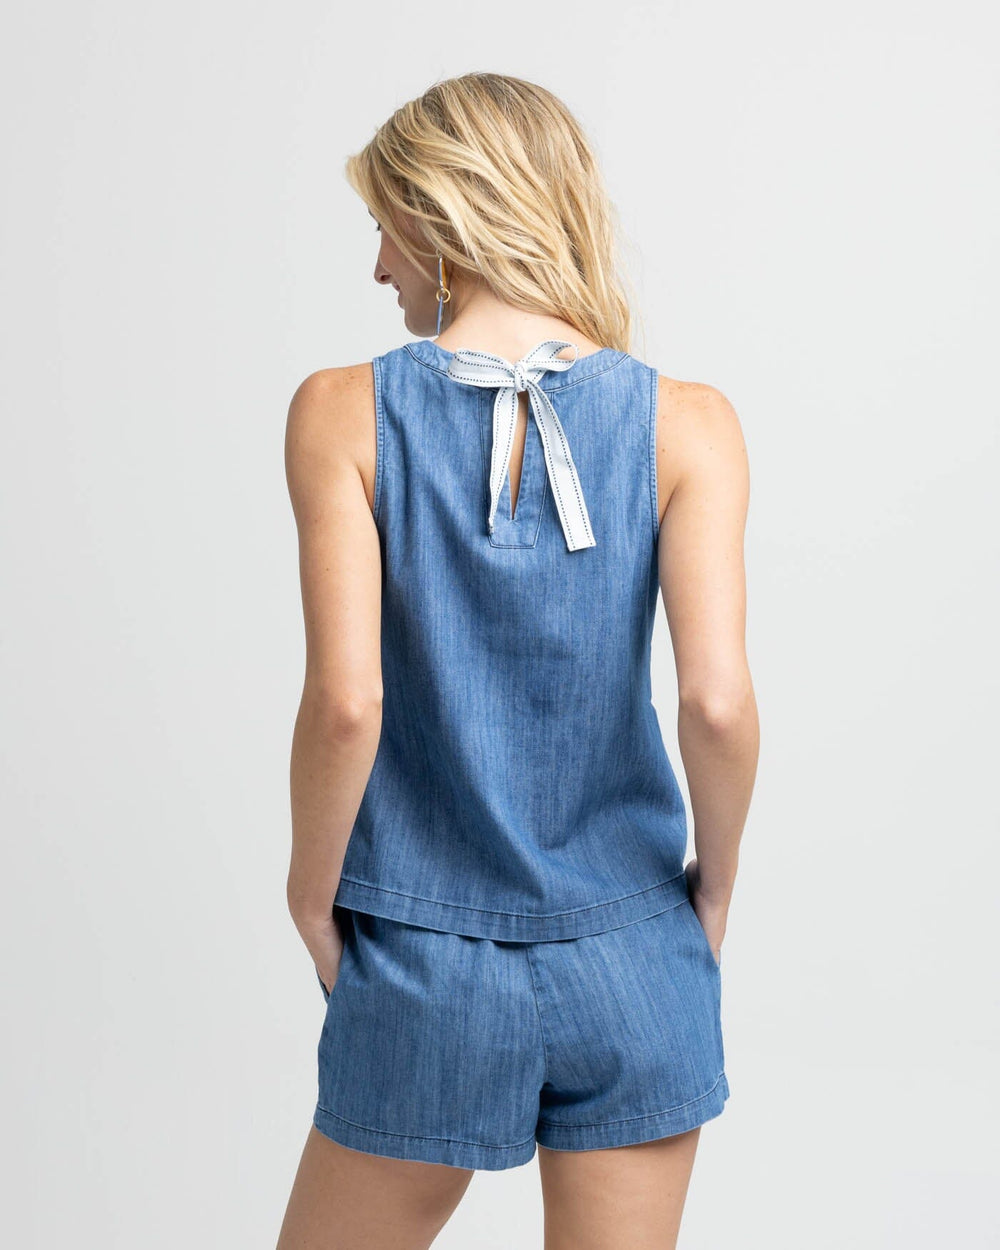 The back view of the Southern Tide Carissa Denim Tank by Southern Tide - Medium Wash Indigo